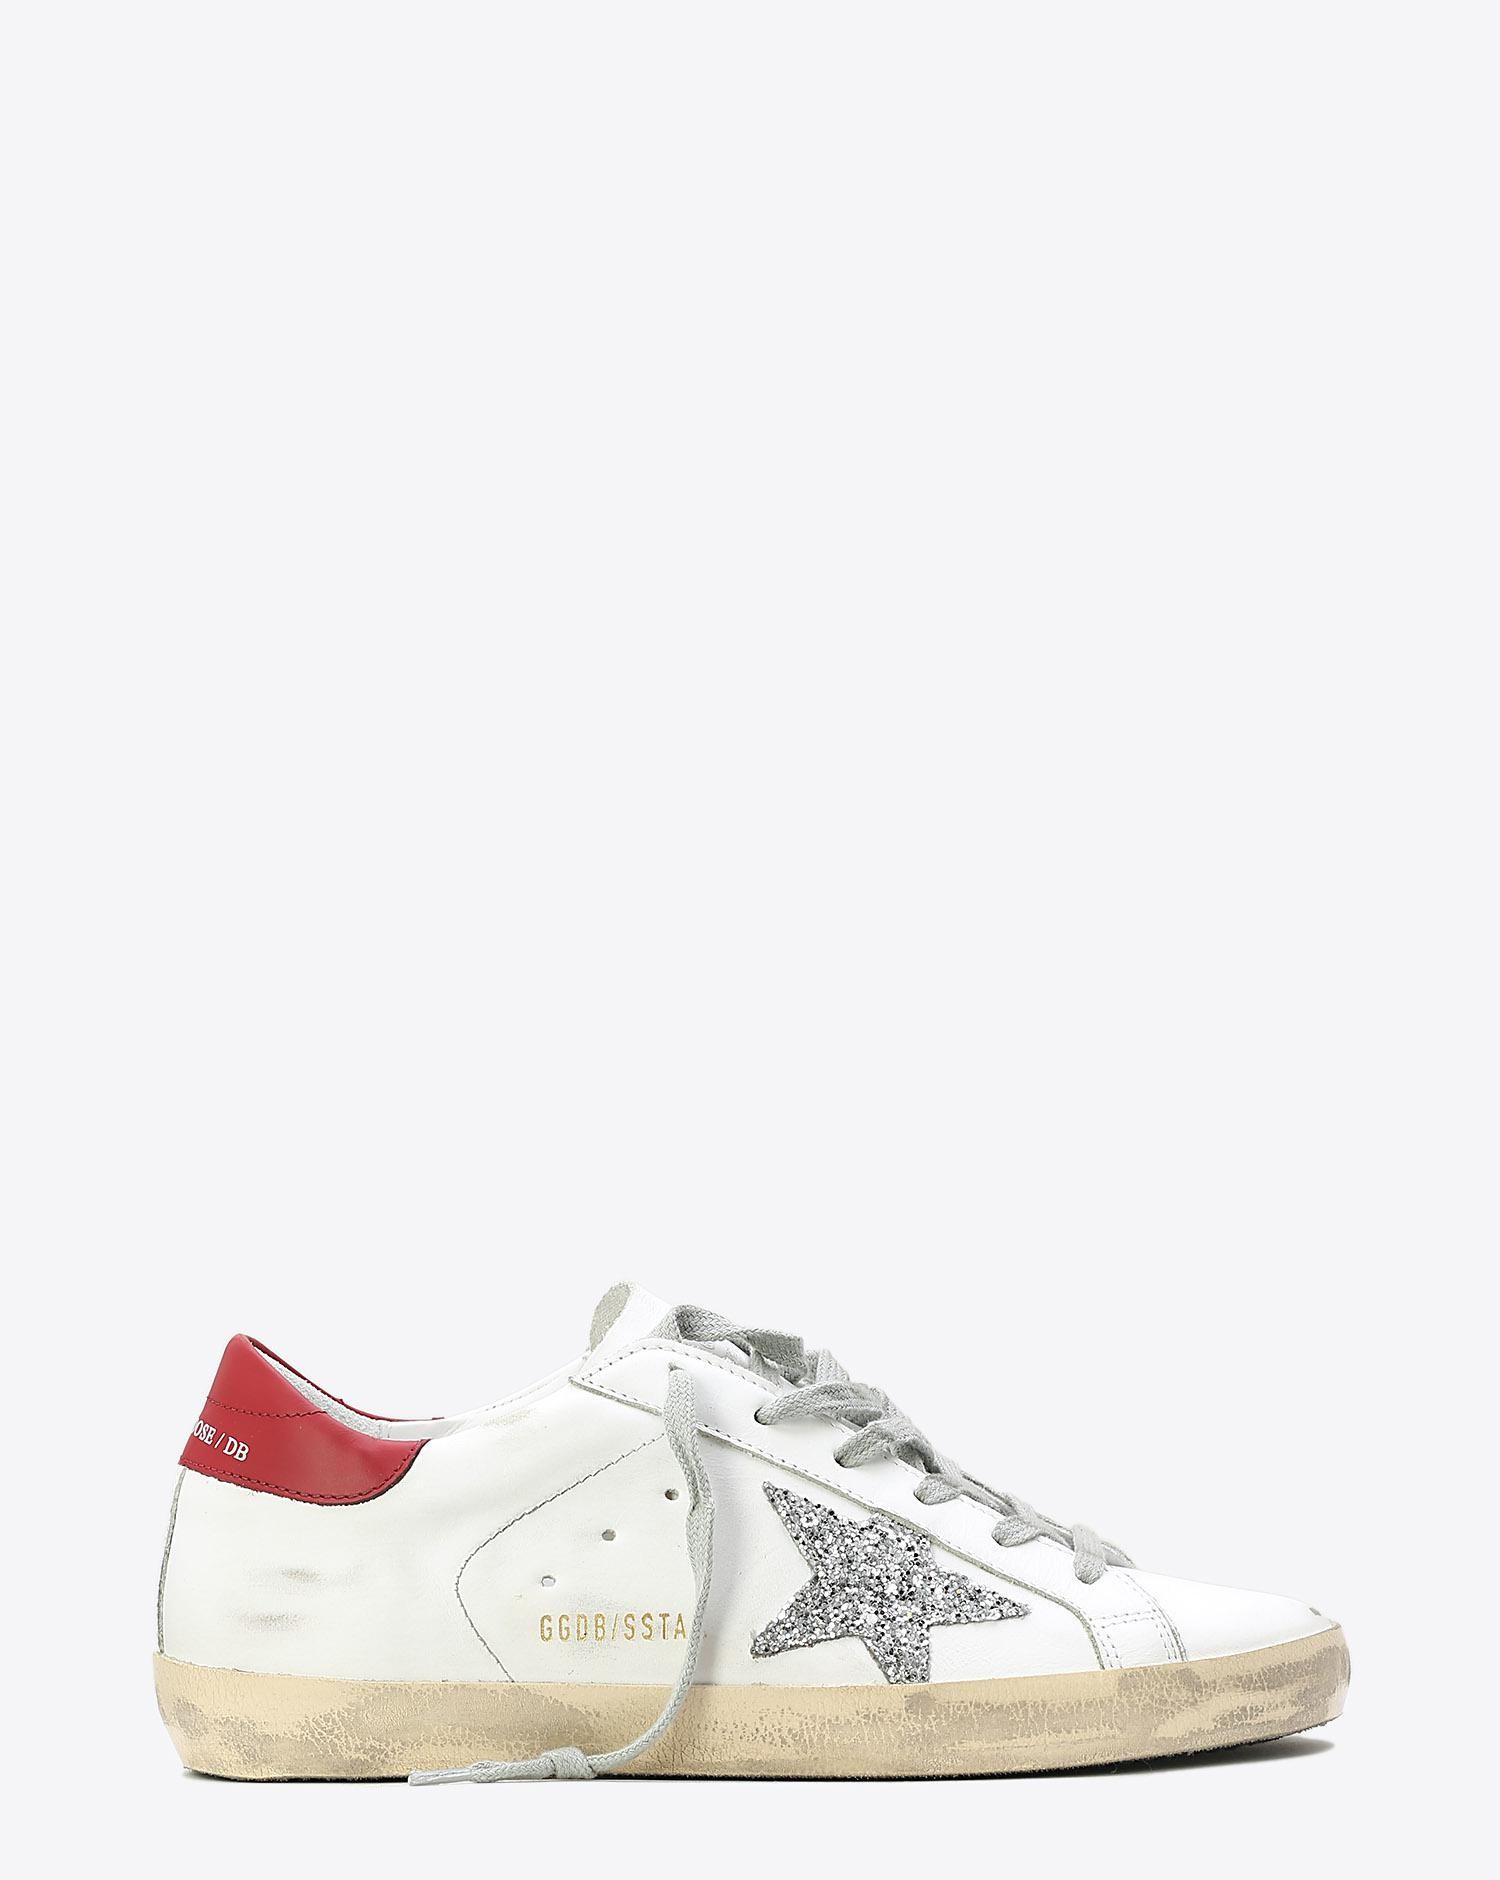 Golden Goose Woman Pré-Collection Sneakers Superstar WhiteRed - Silver Glitter   